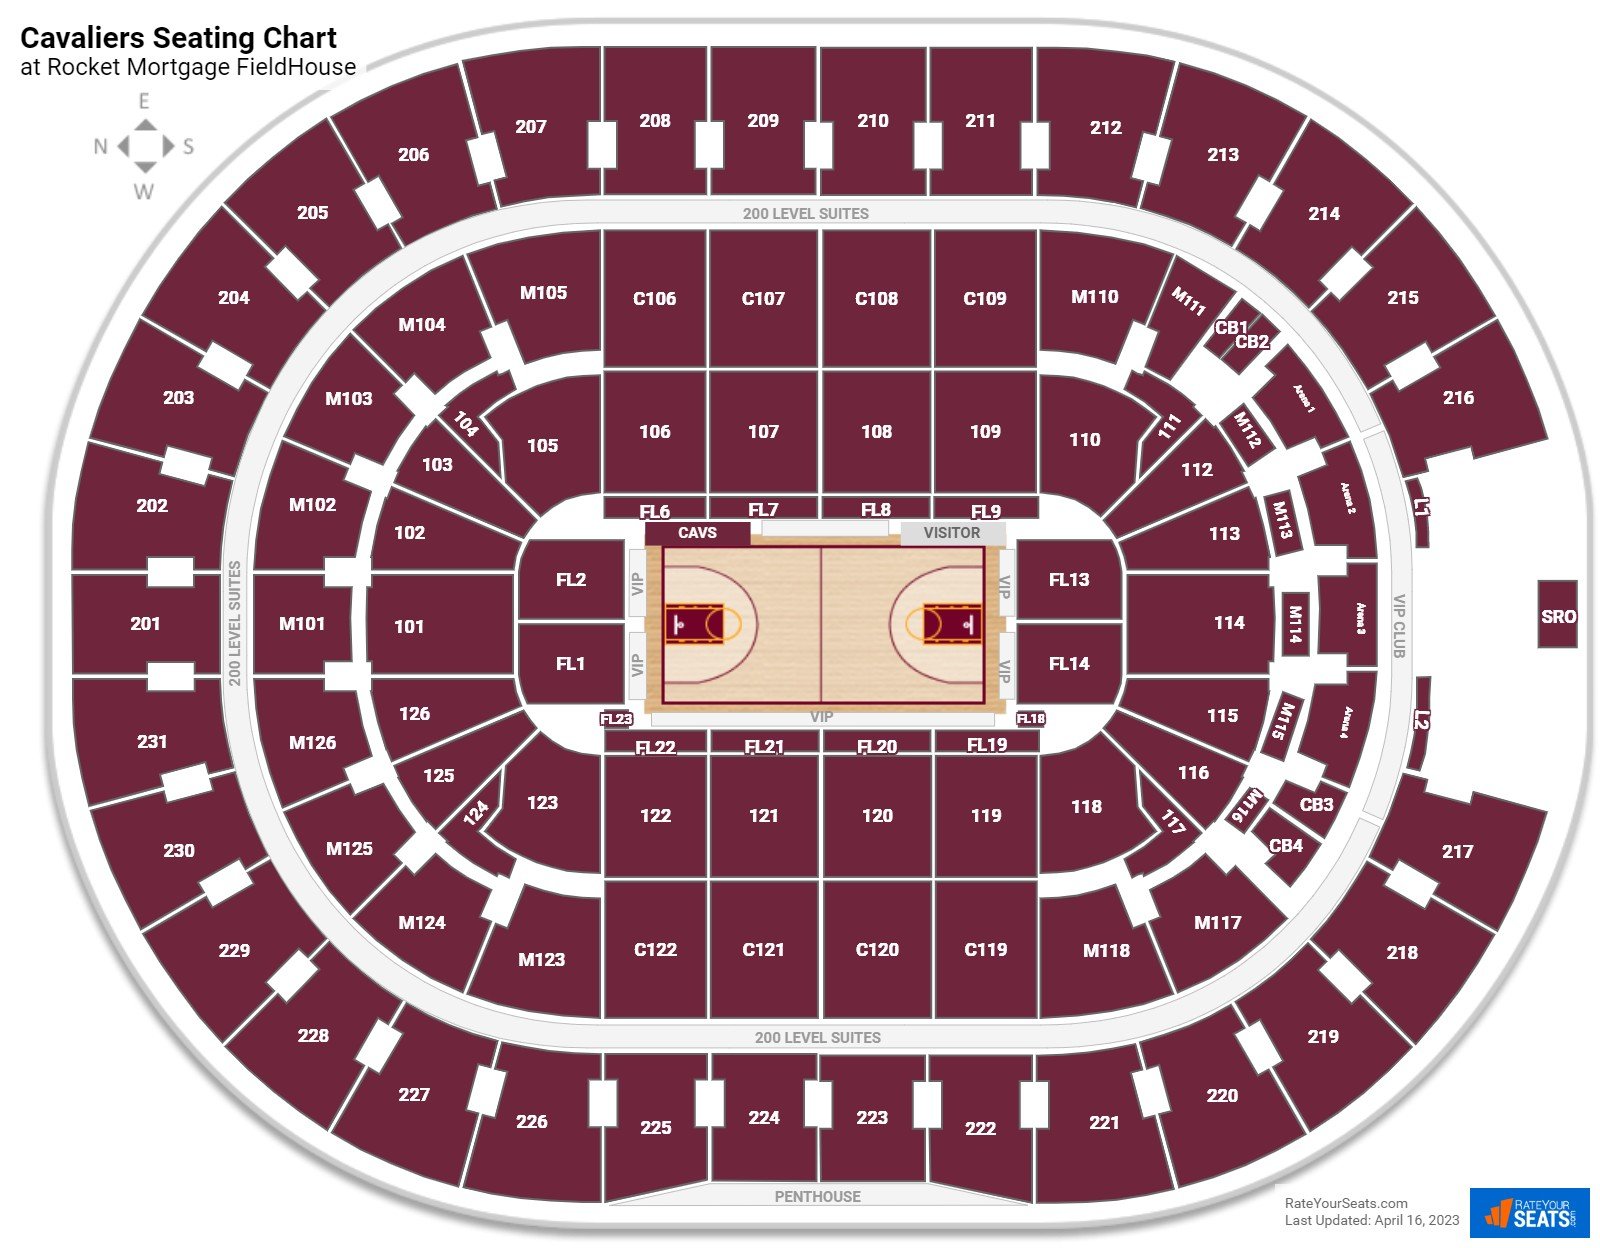 Cleveland Cavaliers Seating Chart - RateYourSeats.com